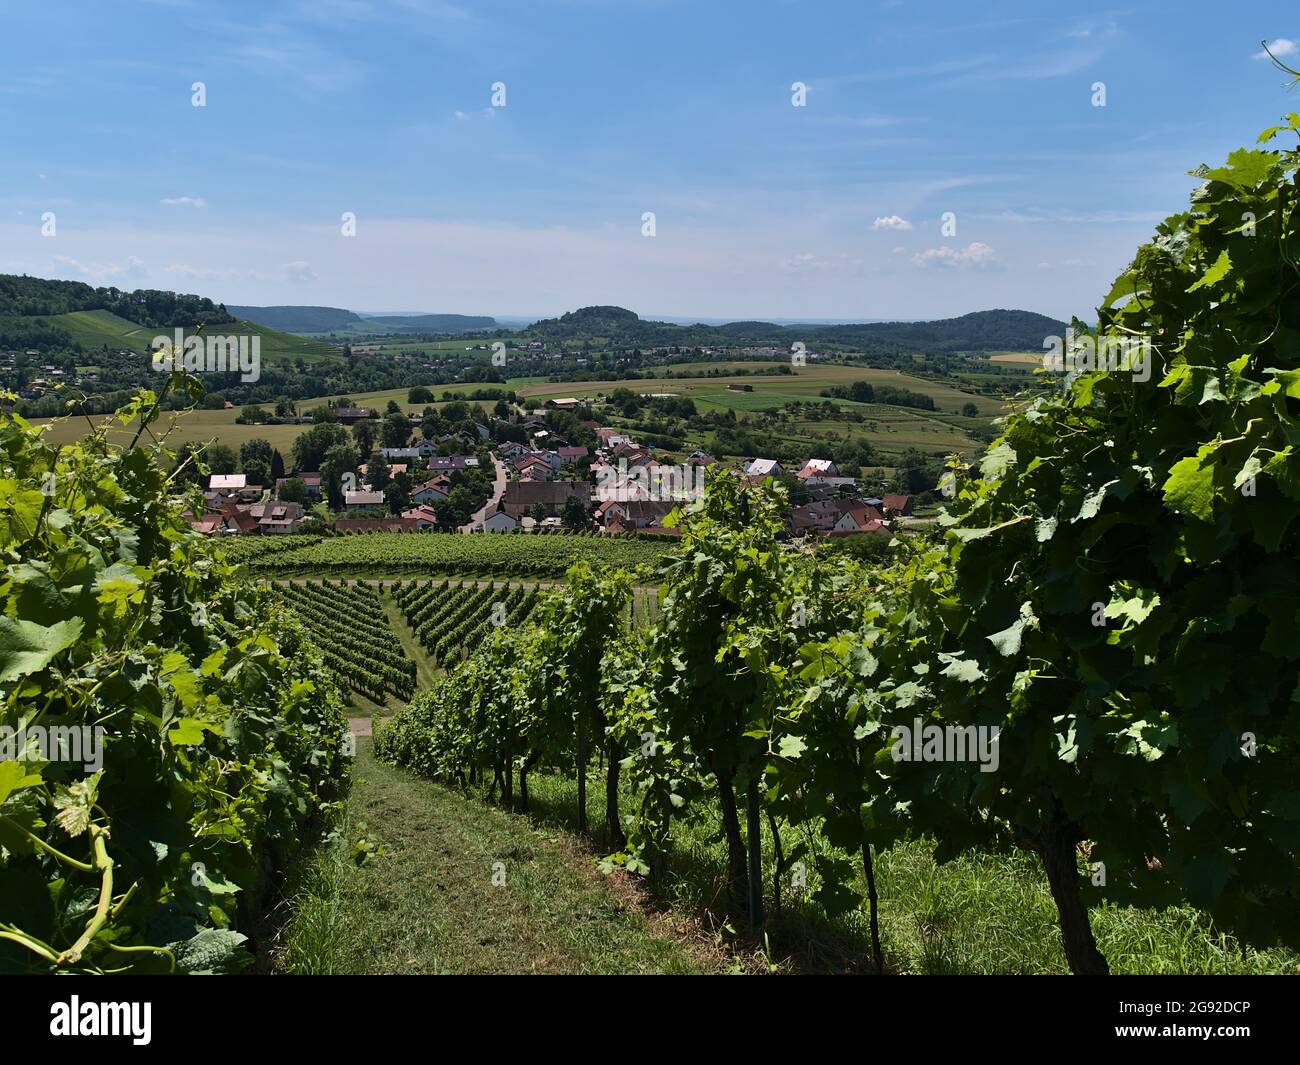 Beautiful rural landscape with view through vineyards with green leaves in summer with small village Helfenberg located in a valley. Stock Photo